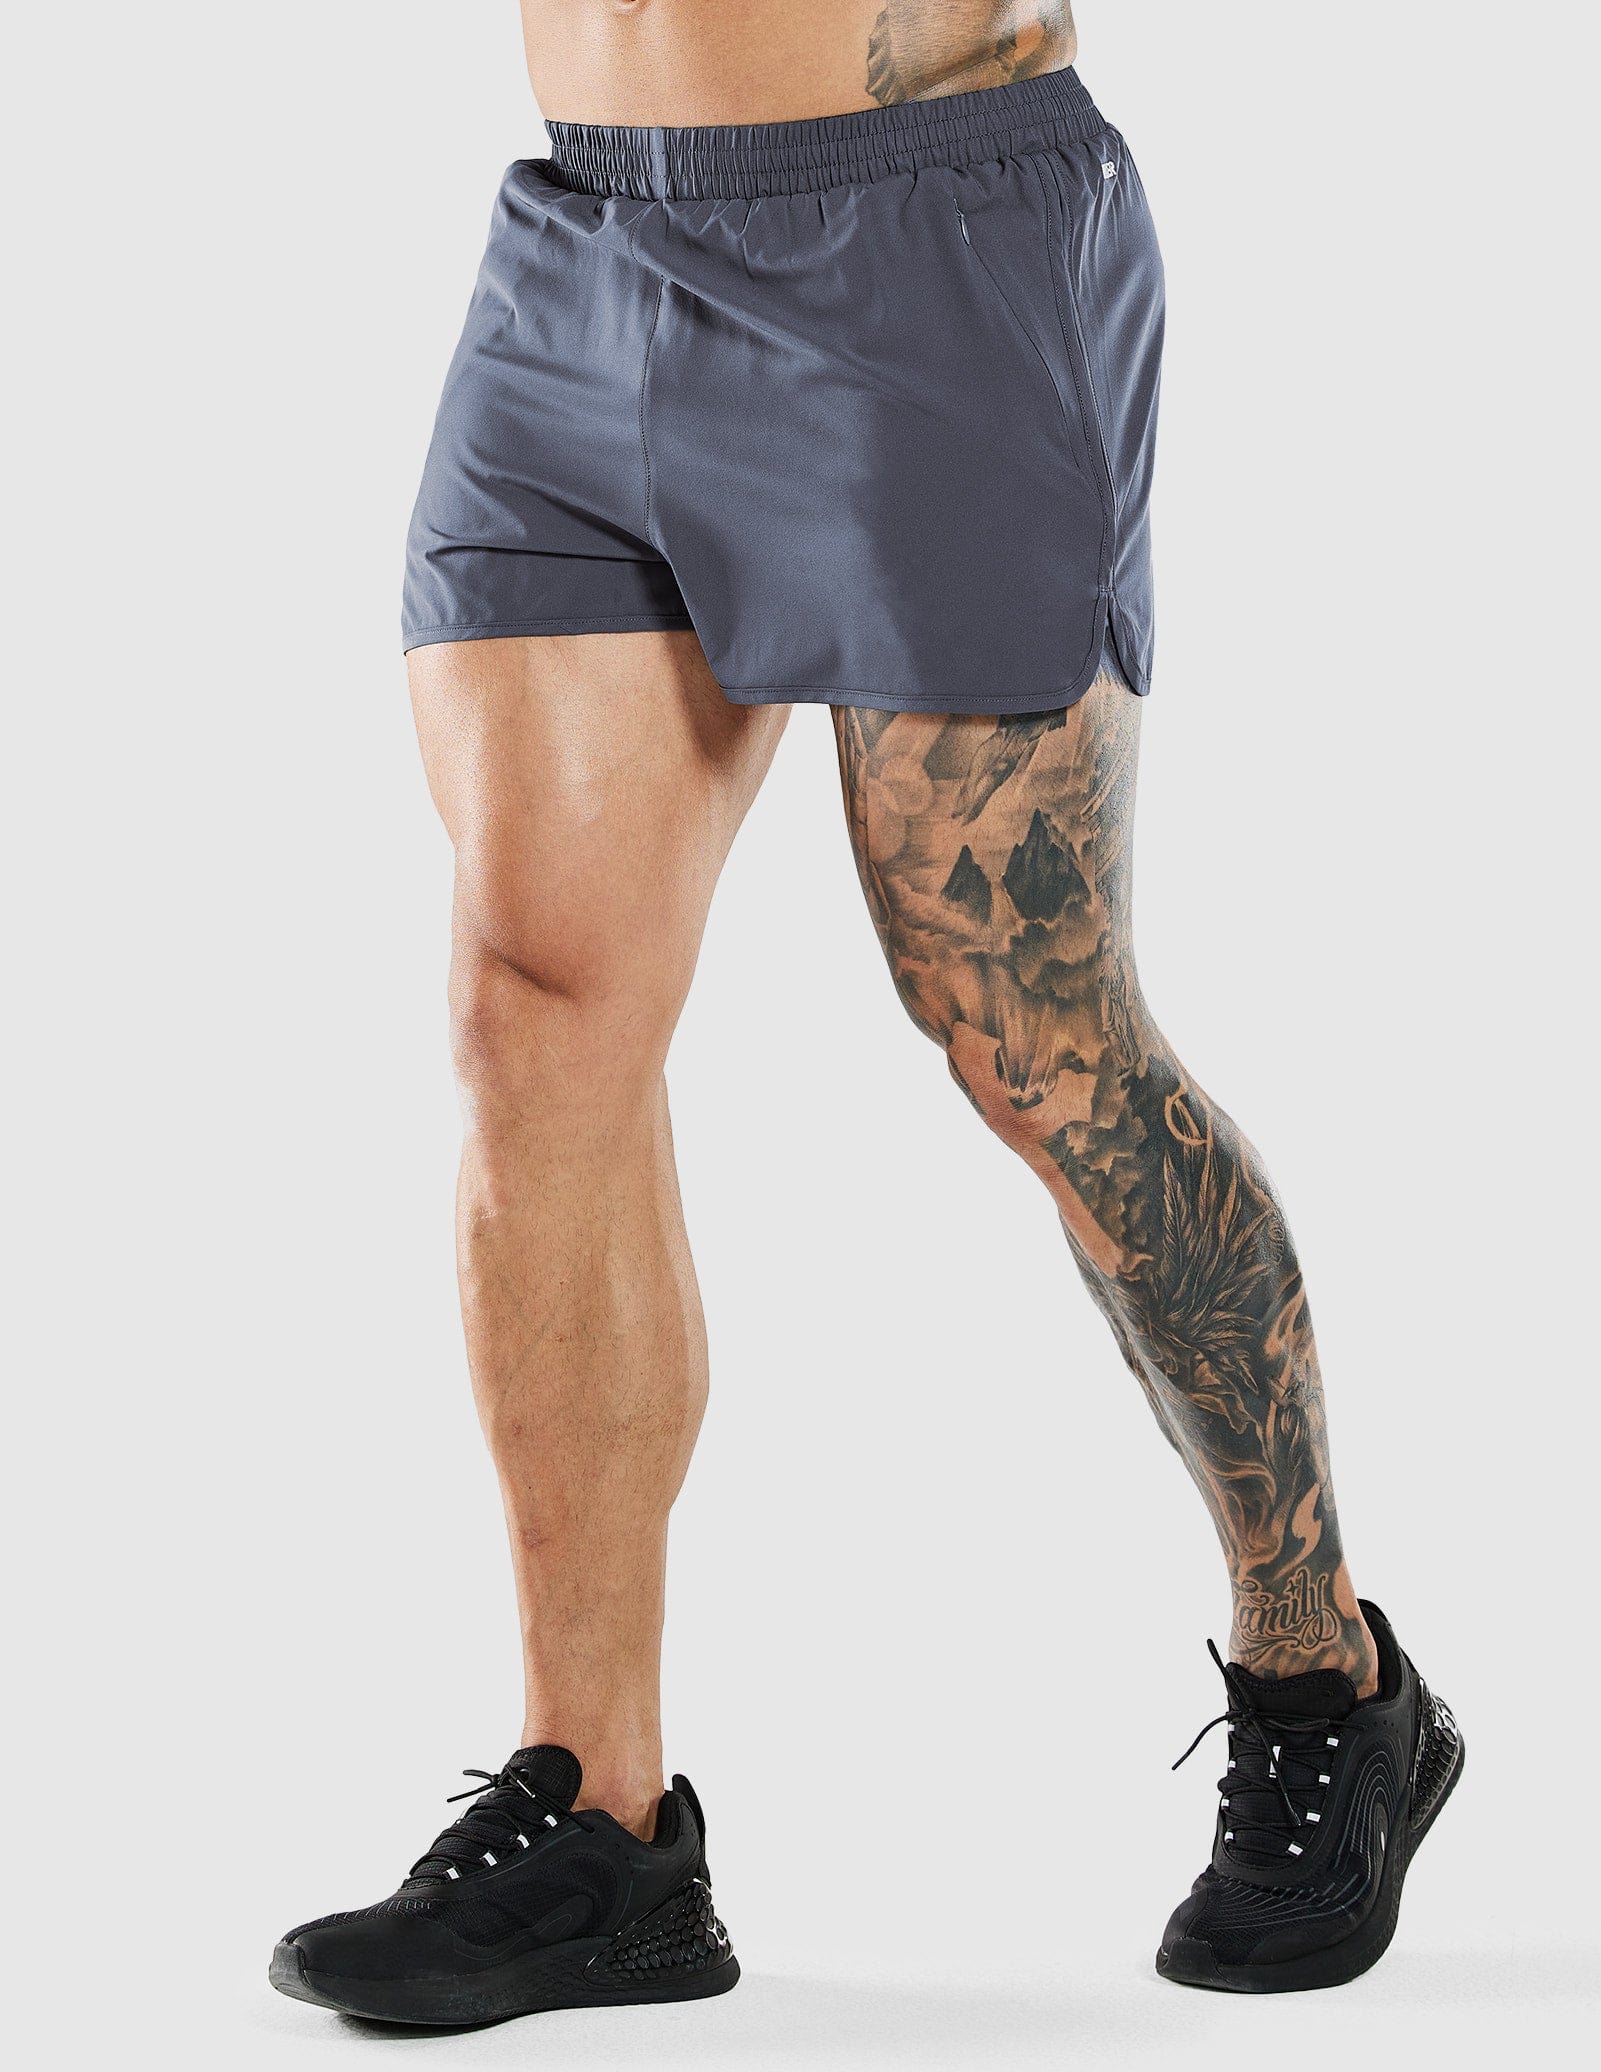 Men's 3 Inches Quick Dry Running Shorts with Liner Zip Pockets Men's Shorts MIER